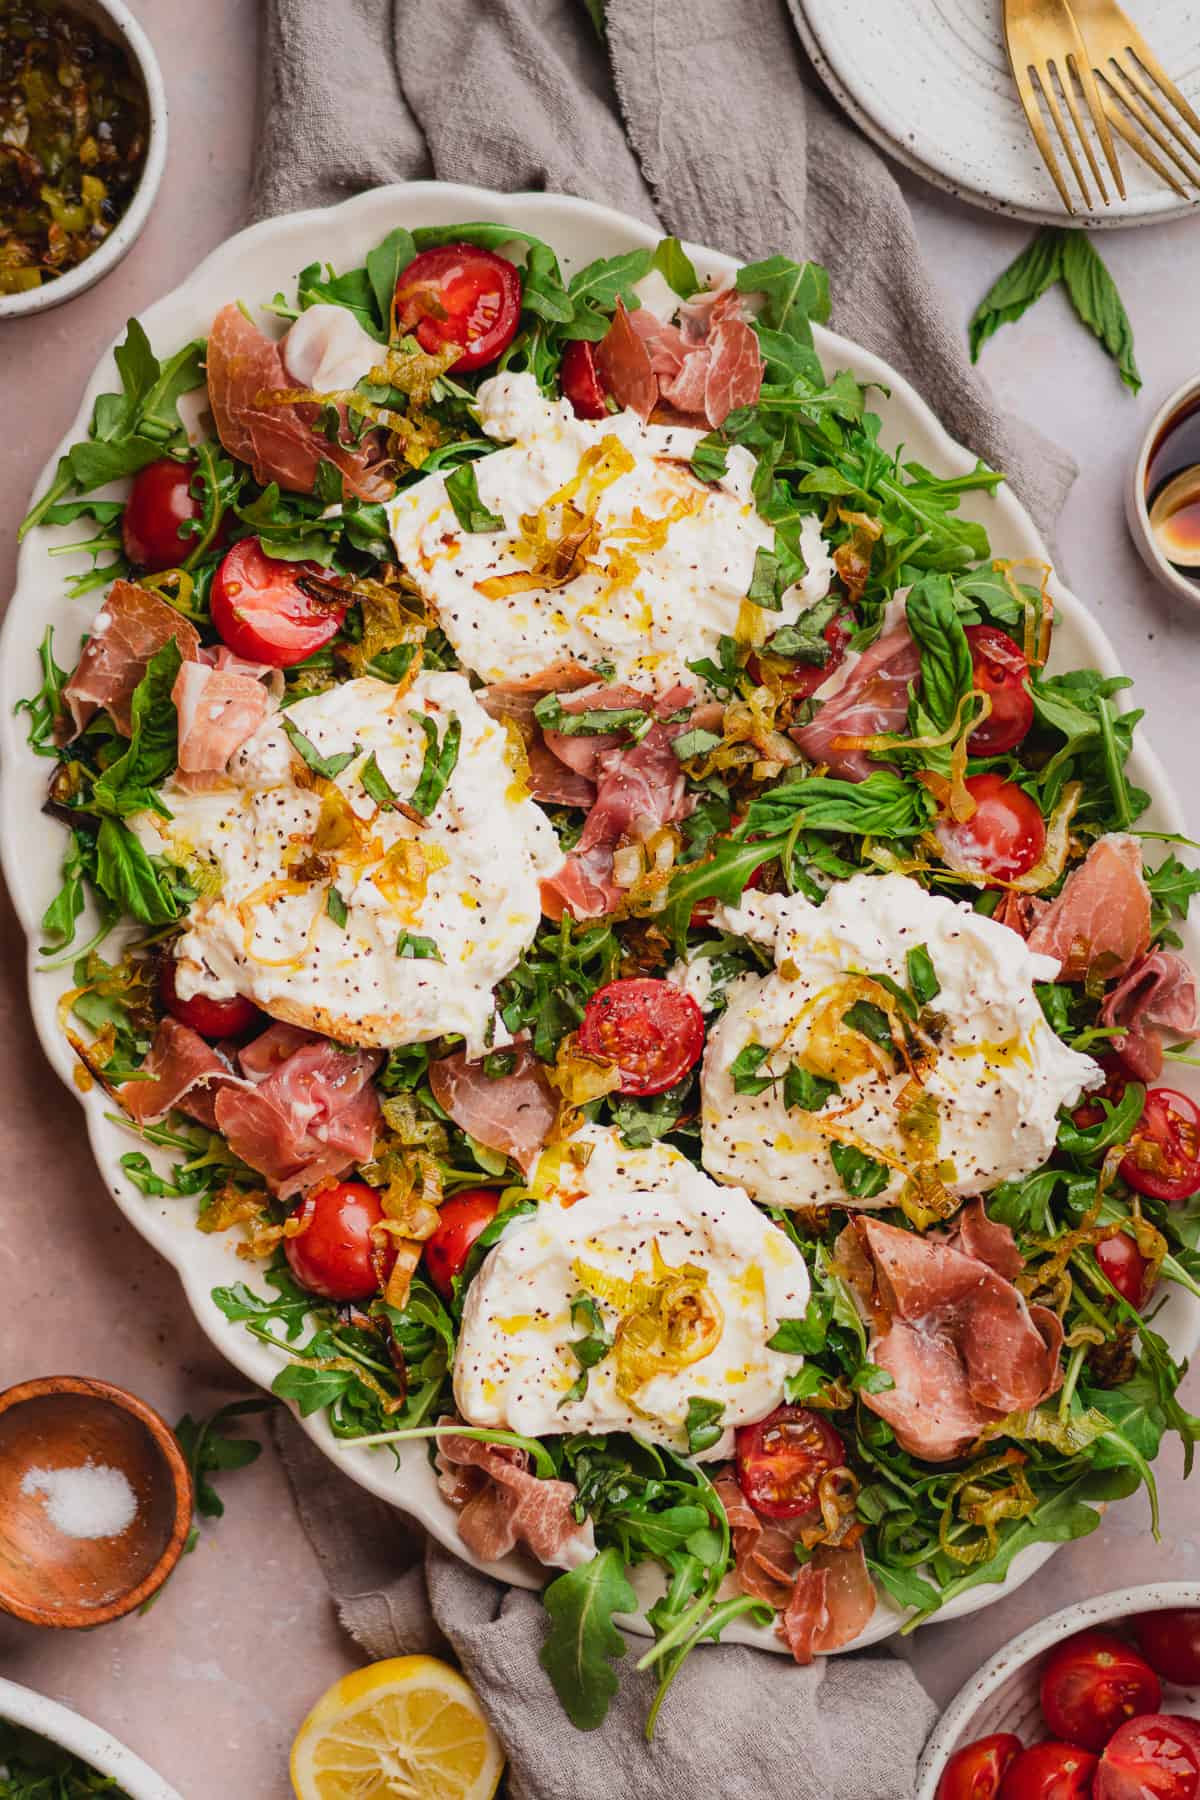 flat lay scene of a burrata and prosciutto salad with tomatoes, basil, and fried leeks.